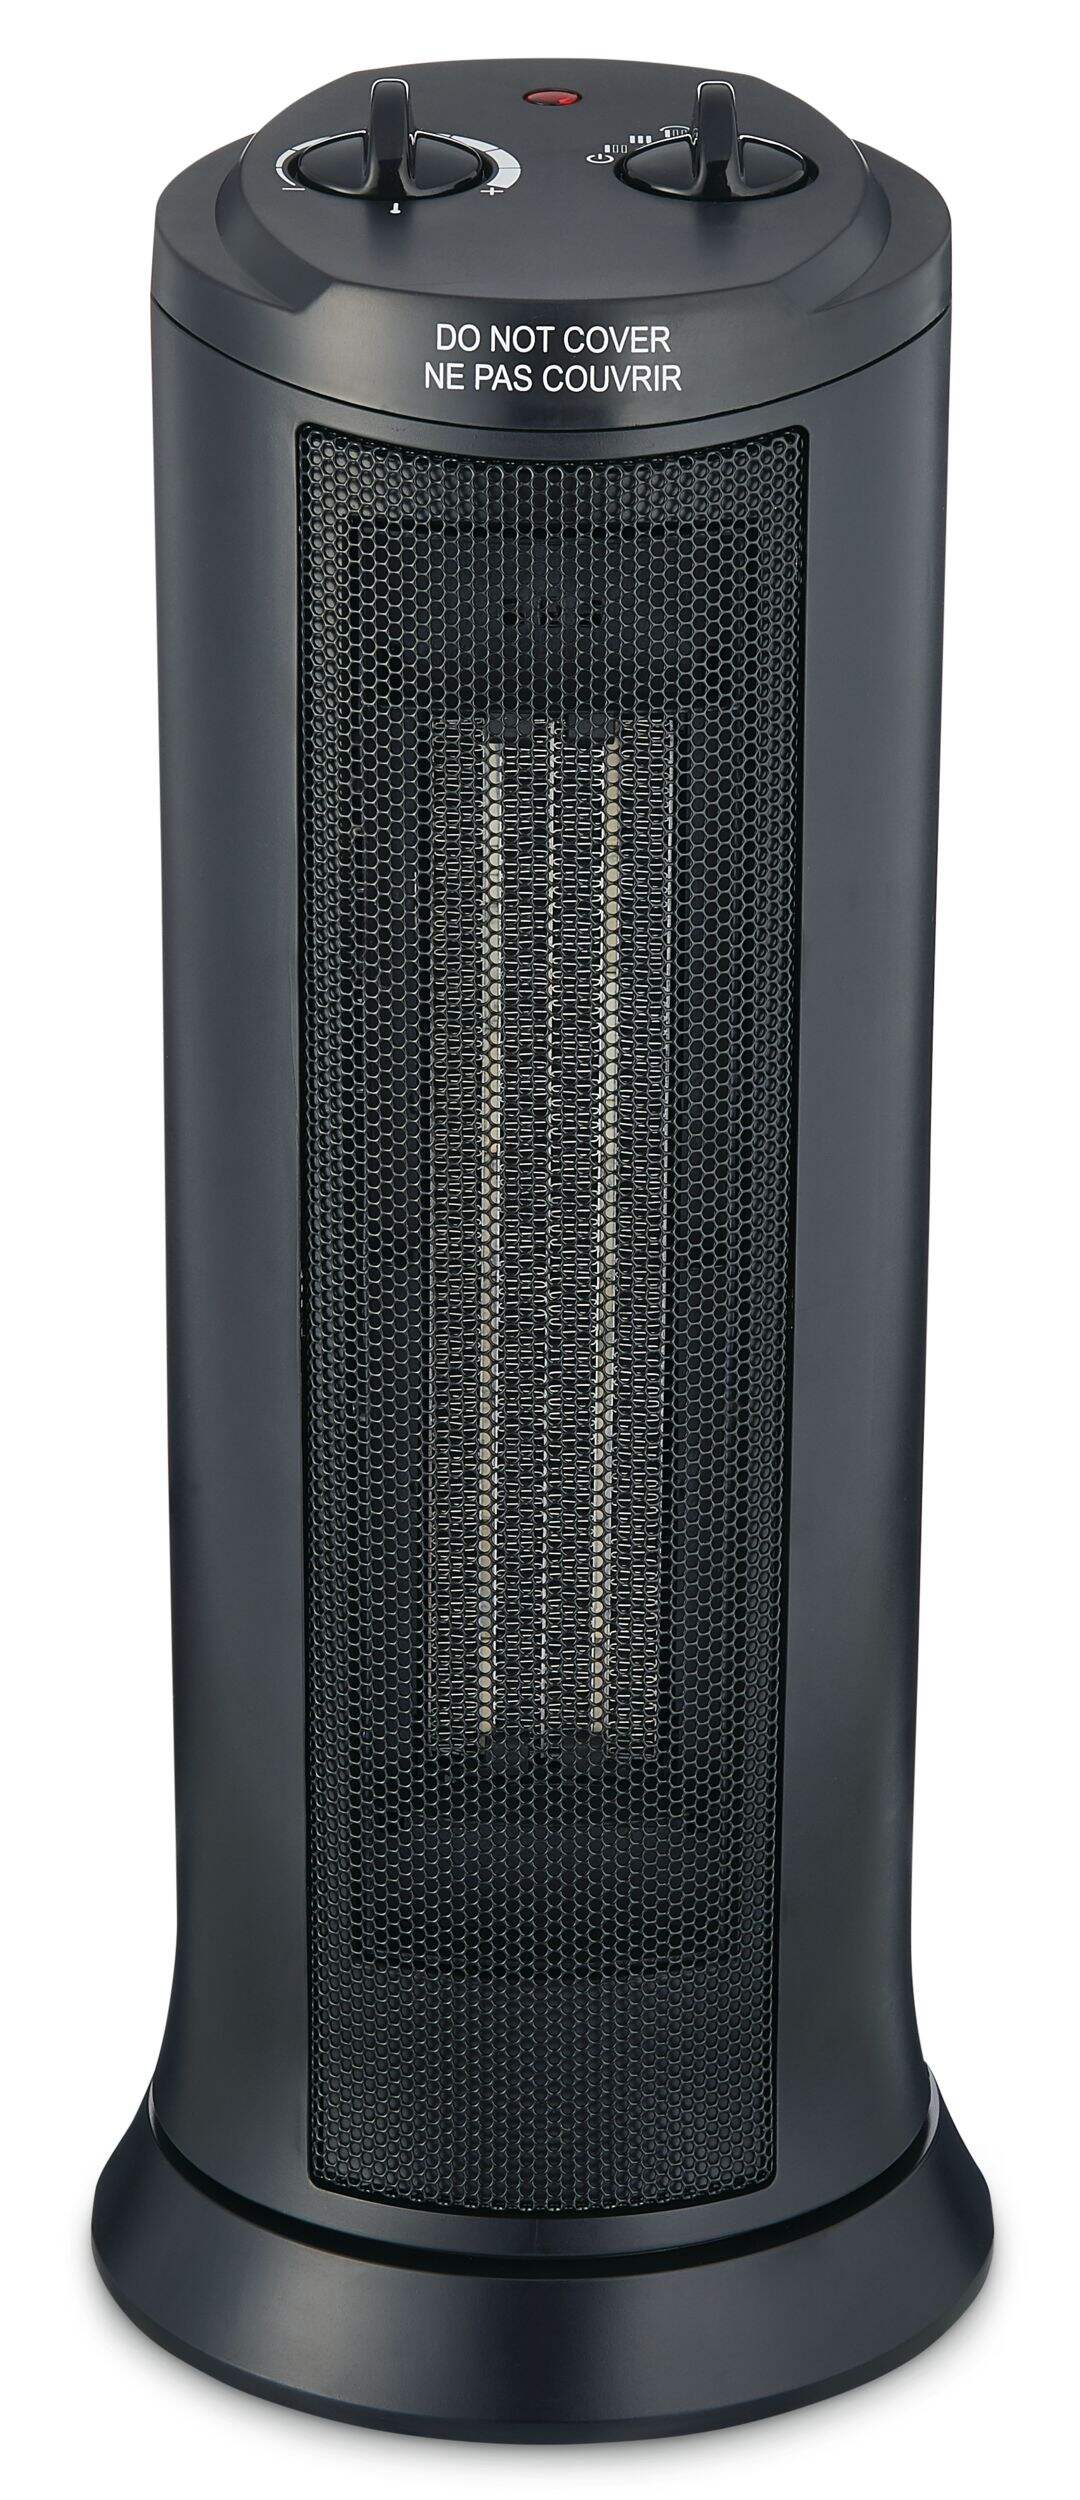 For Living Oscillating Tower Ceramic Space Heater w/Thermostat, 1500W (Refurbished - 90 Days Warranty)